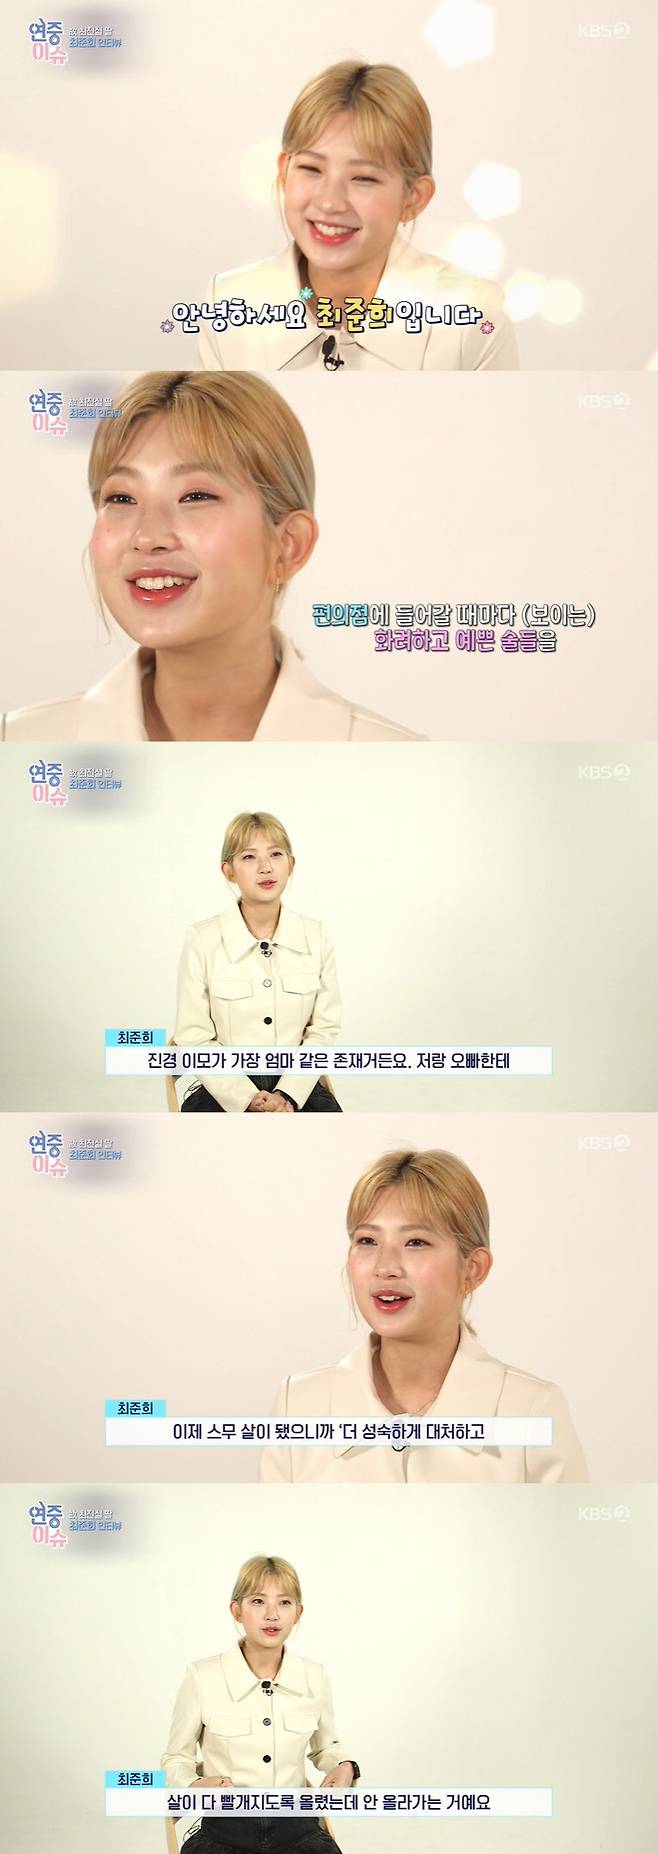 Year-round live Choi Joon-Hee opens up about future movesIn KBS2 Year-round live broadcast on the 11th, an interview with Choi Joon-Hee was released.Choi Joon-Hee said, Every time I go into a convenience store, I can buy pretty drinks that I can buy with my own certificate.Among the many aunts who take Choi Joon-Hee, Hong Jin-kyung gives a lot of warm words. Choi Joon-Hee said, A aunt is the most mother-like.I am 20 years old, so I want to be Jun-hee who can cope more maturely and live. I pray for me every day. Choi Joon-Hee, who lost 44kg and became a hot topic, said, I put up clothes to make my flesh red, but I did not go up.I was dressed somehow, but it did not peel off. At that time, I took off my clothes in the fitting room and cried a lot. The reason Choi Joon-Hee gained weight was due to a battle with lupus disease; Choi Joon-Hee said: It first took me in the third year of junior high school, but there is no cure concept.I ate a lot because of the side effects of the drug, and it was 96kg. Choi Joon-Hee, who recently signed an exclusive contract with his agency, asked, Do you follow your mother to Actor? I think that my daughter is acting because of my mother.I want to go out to cafes, lookbooks, makeup, dog cafes, he said. I am twenty years old and I still want to do a lot. Choi Joon-Hee, who wants to do a lot, is also preparing to publish an essay recently.Choi Joon-Hee commented on the book, I have not lived a long life so far, but I think I have experienced a lot of things like movies for 20 years.I am preparing a prose book about what I felt through those things, and the point of time. Public attention is also a burden: Choi Joon-Hee said: Sometimes ordinary friends are envious.Even if I put up something, it is the same peer friends. I look exaggerated when I do it, and Friend said, It was hard because anyone in Korea can do it.Finally, Choi Joon-Hee told fans, I was so angry that it was not an exaggeration to say that my mother had a baby and the public raised it.I look forward to my mothers share and look at me with a lot of love-filled eyes. My brother and I plan to live nicely enough to say, My children are cool even if I have them when my uncle sees me in the sky.I hope you will continue to support me in the future. 